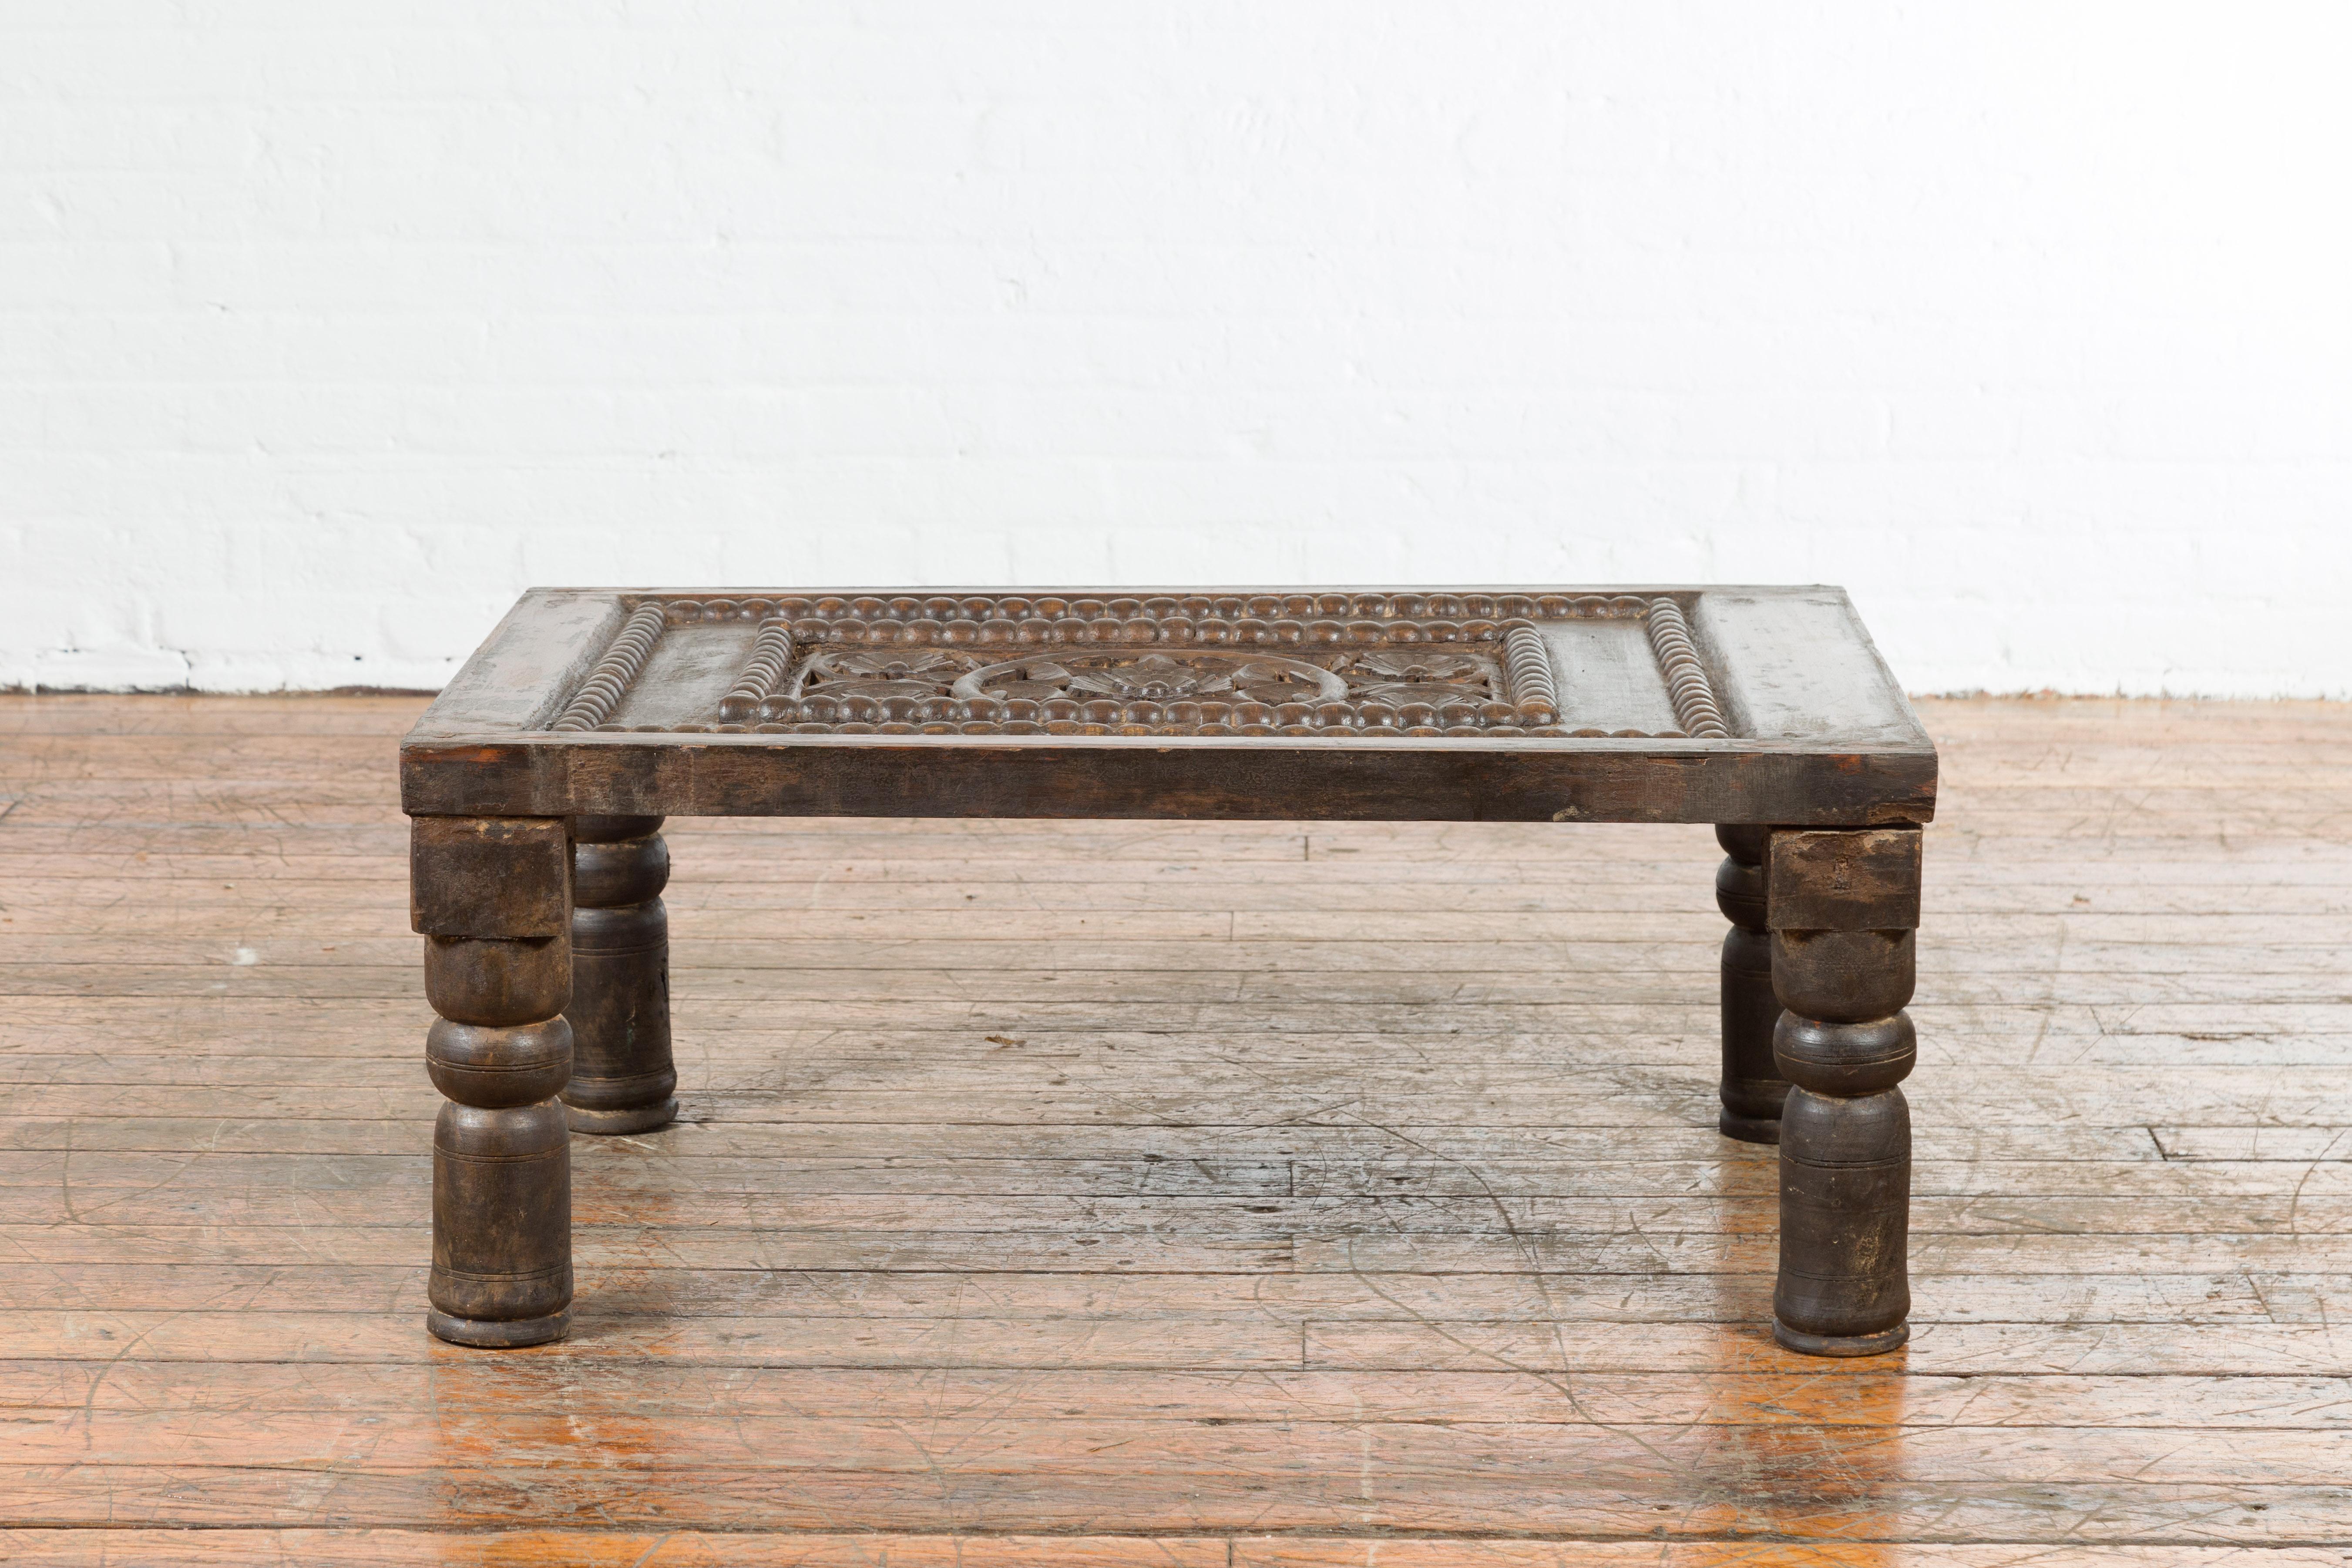 An Indian antique small coffee table from the 19th century, with carved wooden floral motifs and baluster legs. Created in India during the 19th century, this small coffee table features a rectangular top showcasing carved and pierced floral motifs